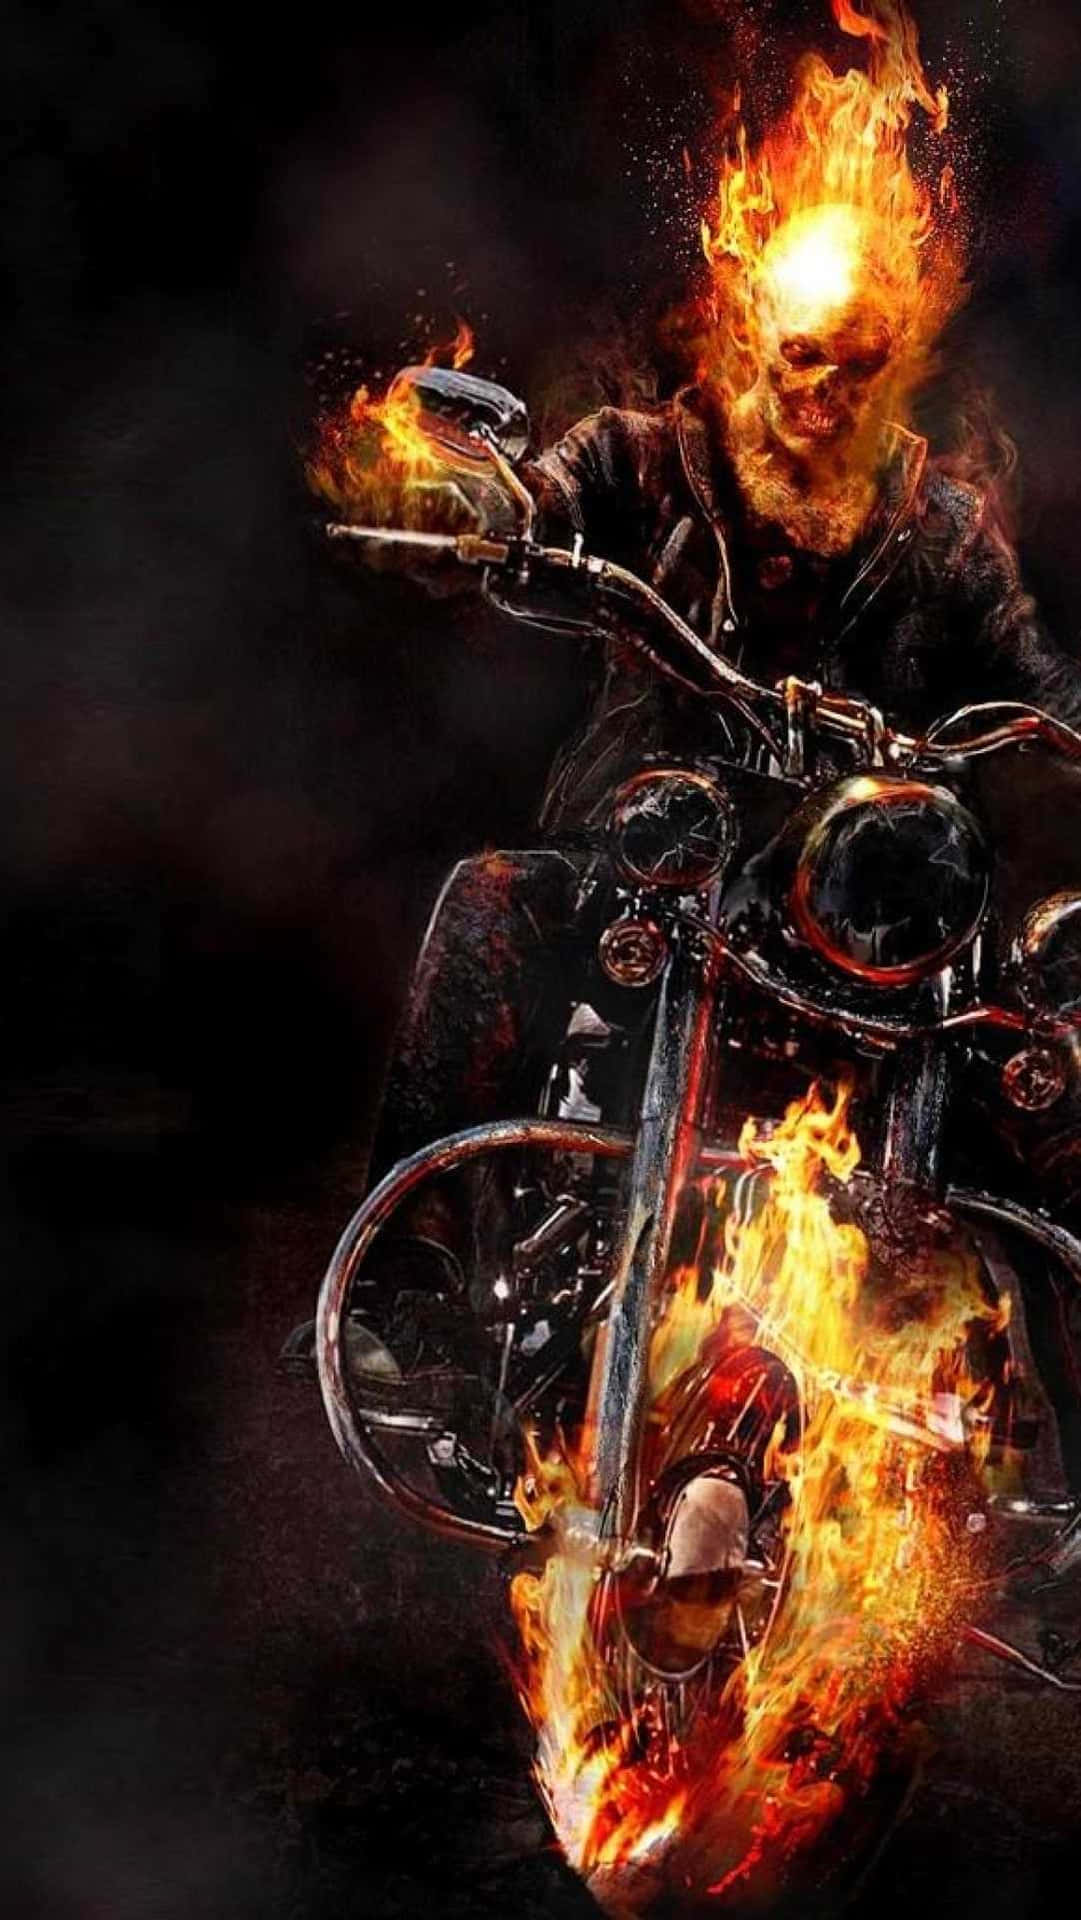 Ghost Rider - Riding the Flame"